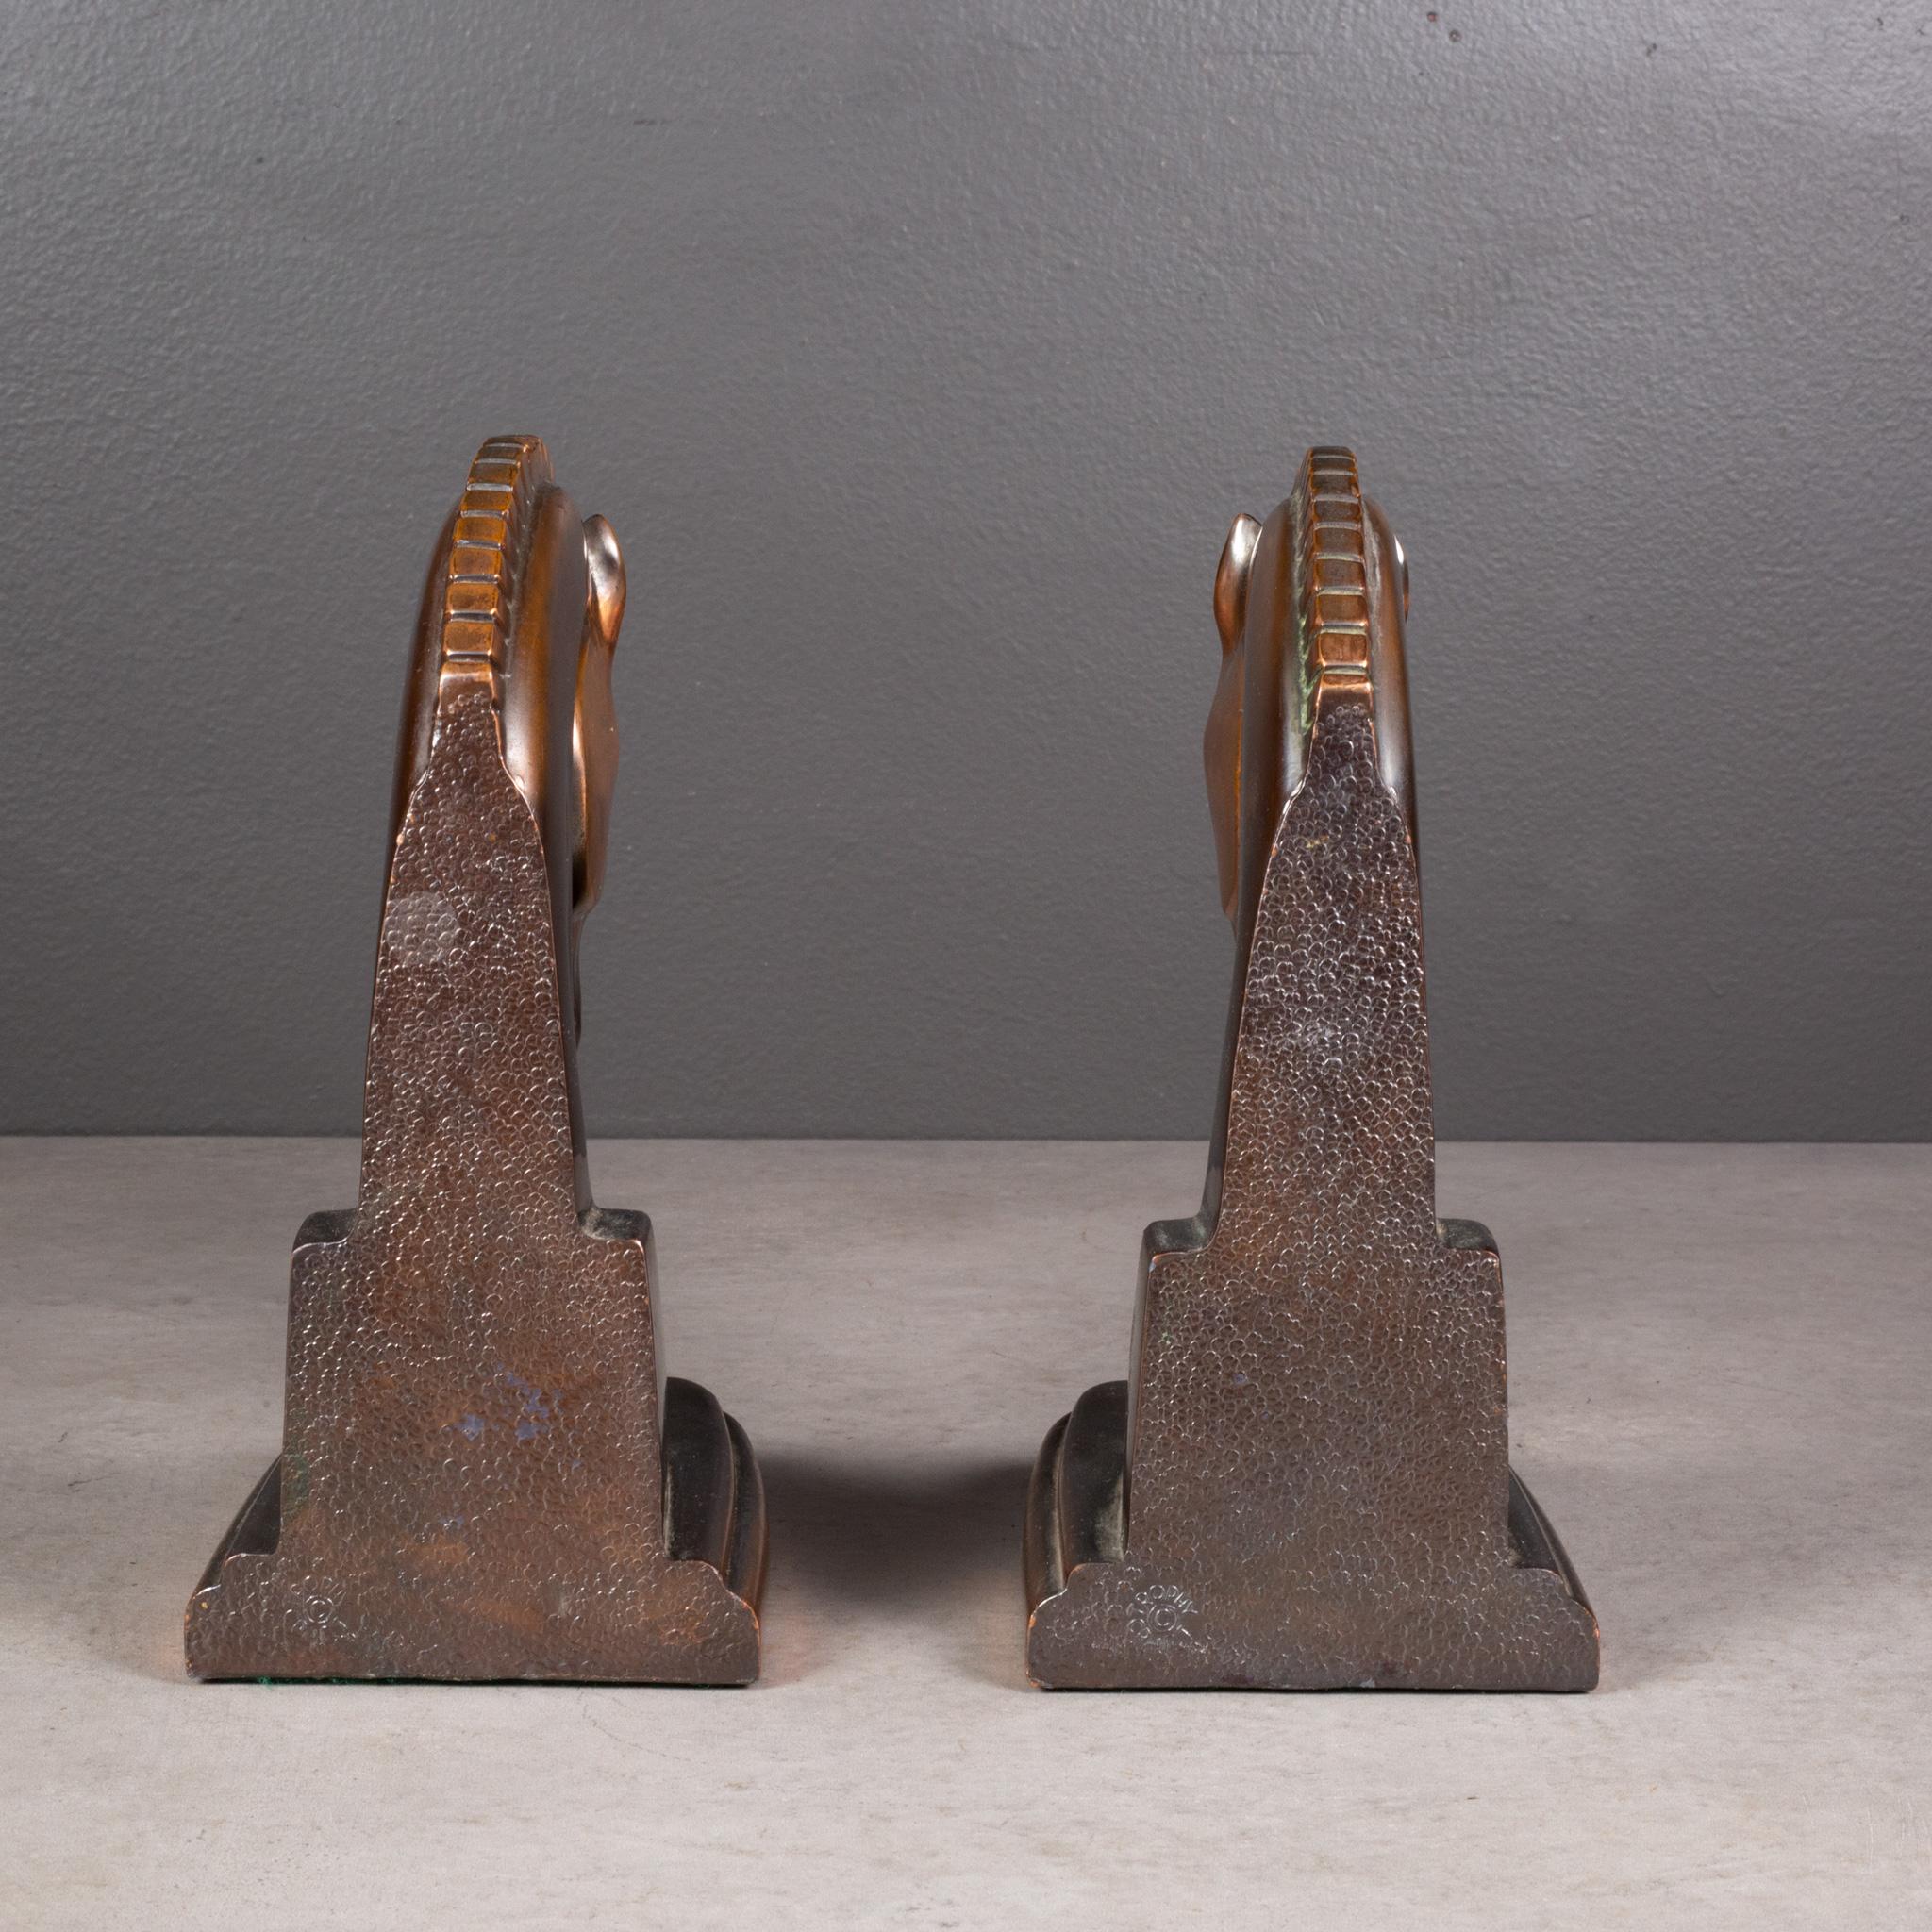 20th Century Art Deco Bronze and Copper Plated Machine Age Trojan Horse Bookends by Dodge Inc